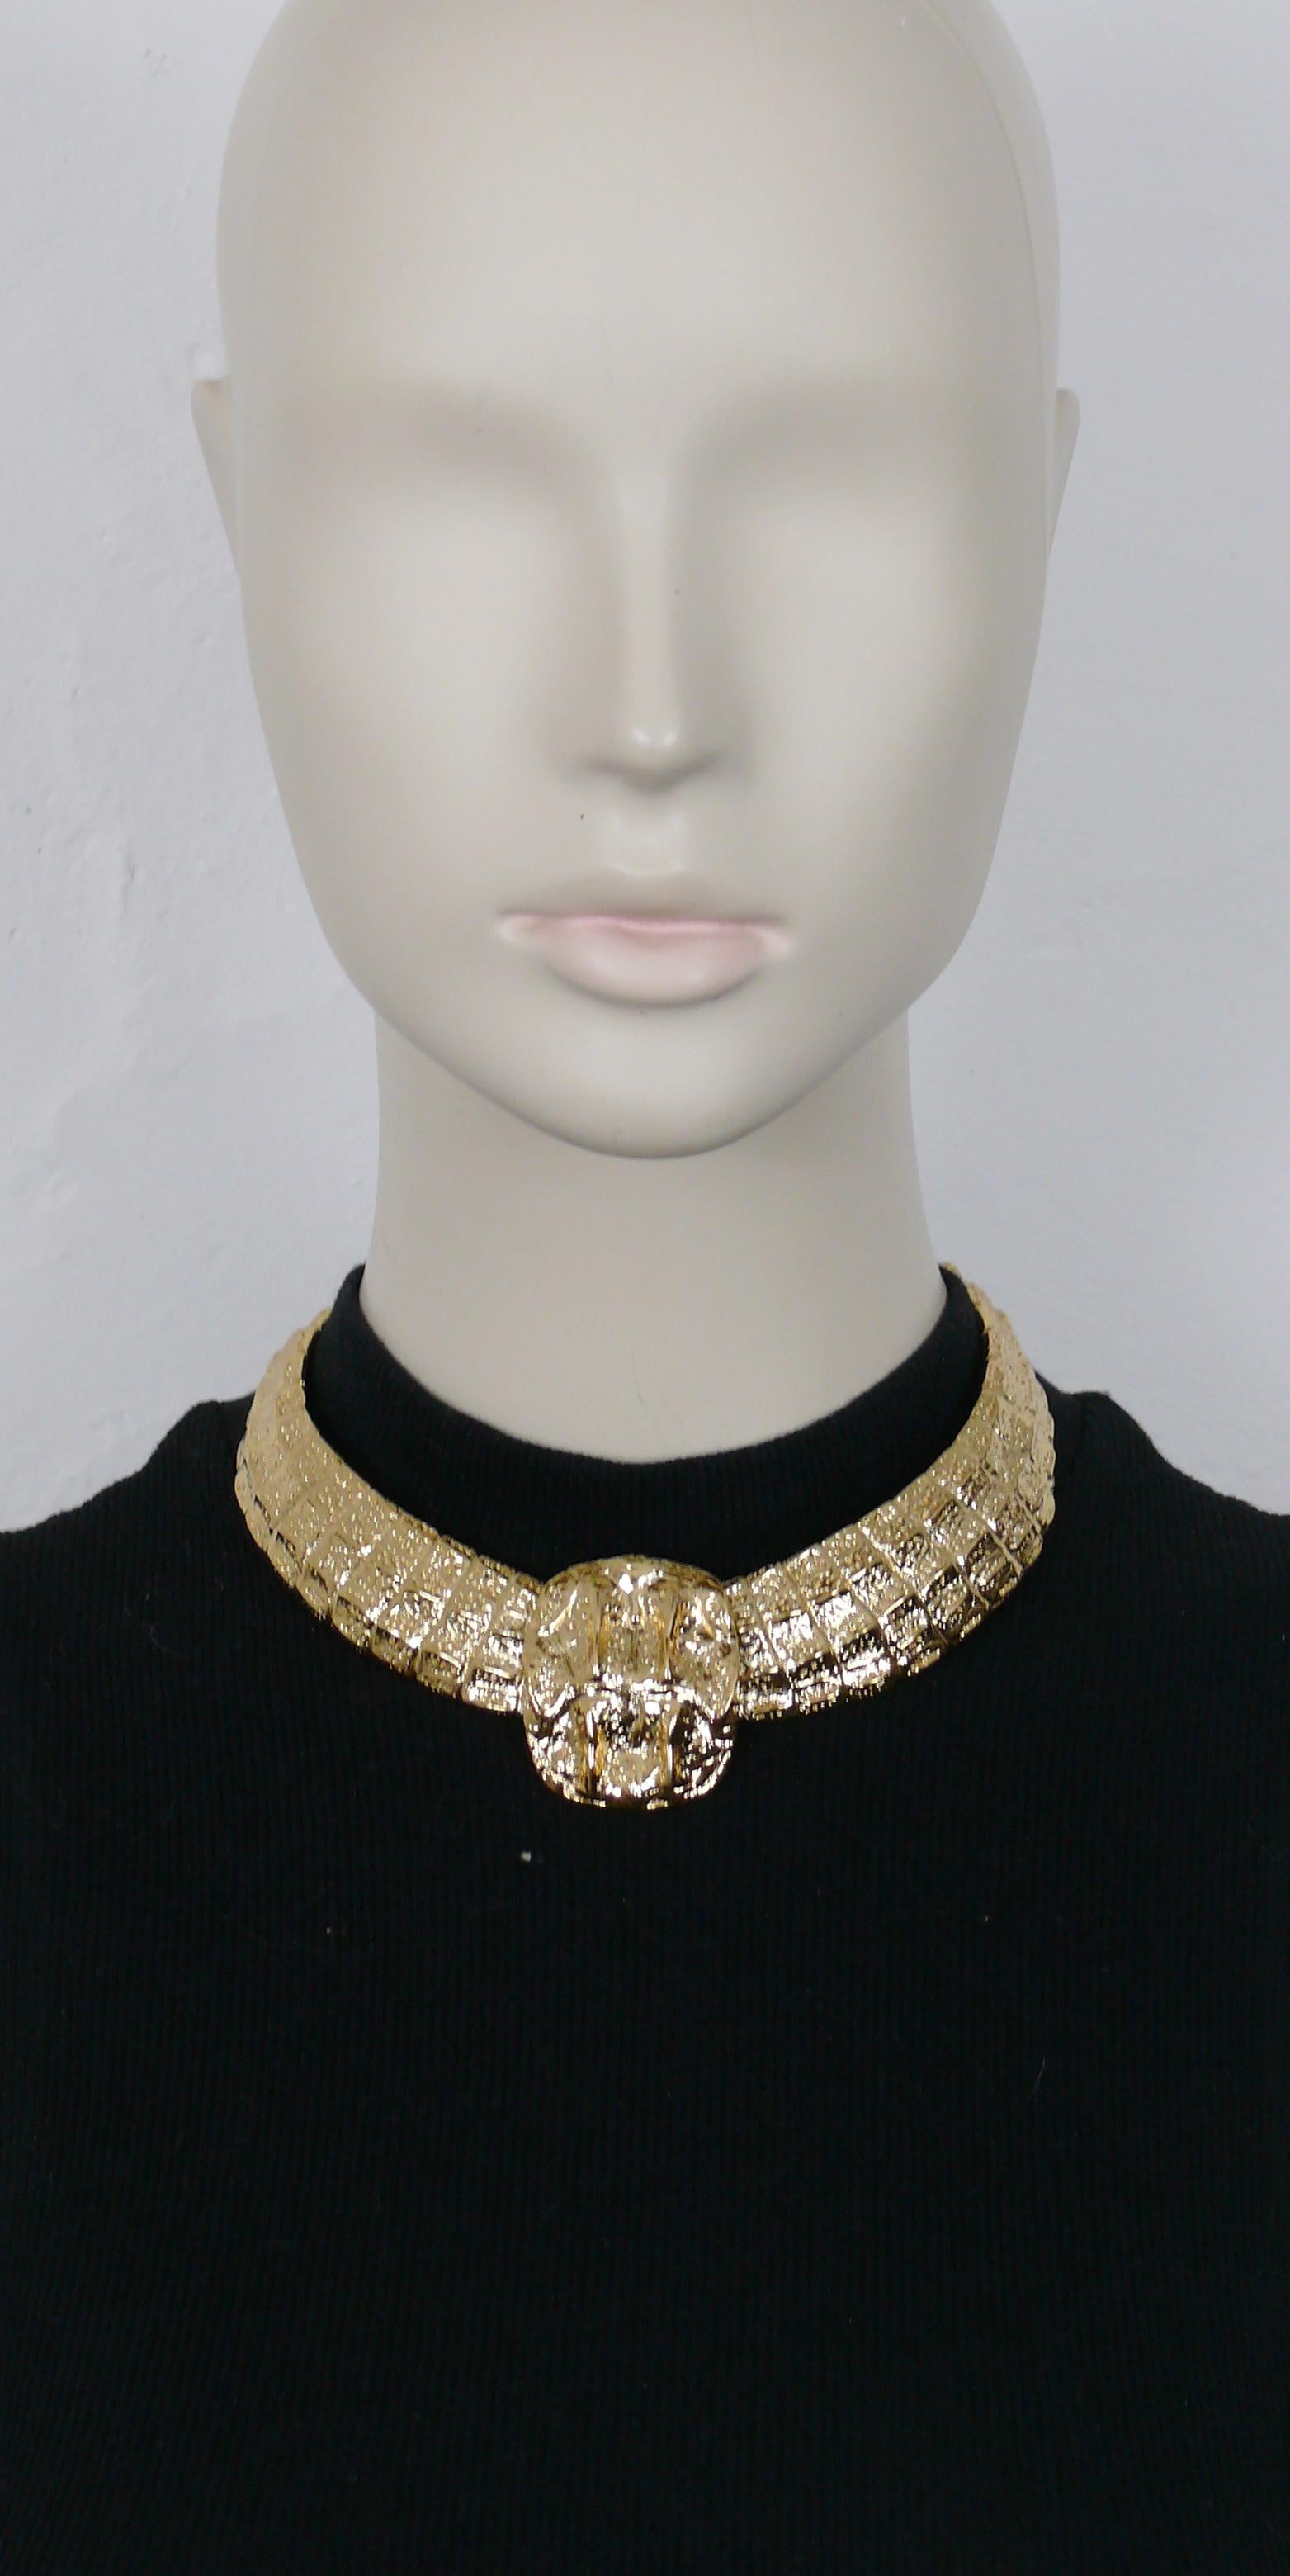 YVES SAINT LAURENT vintage gold toned choker necklace featuring a crocodile scale design.

As seen on PENELOPE CRUZ.

Hook closure with extension chain.

Embossed YSL Made in France.

Indicative measurements : max. circumference approx. 42.40 cm